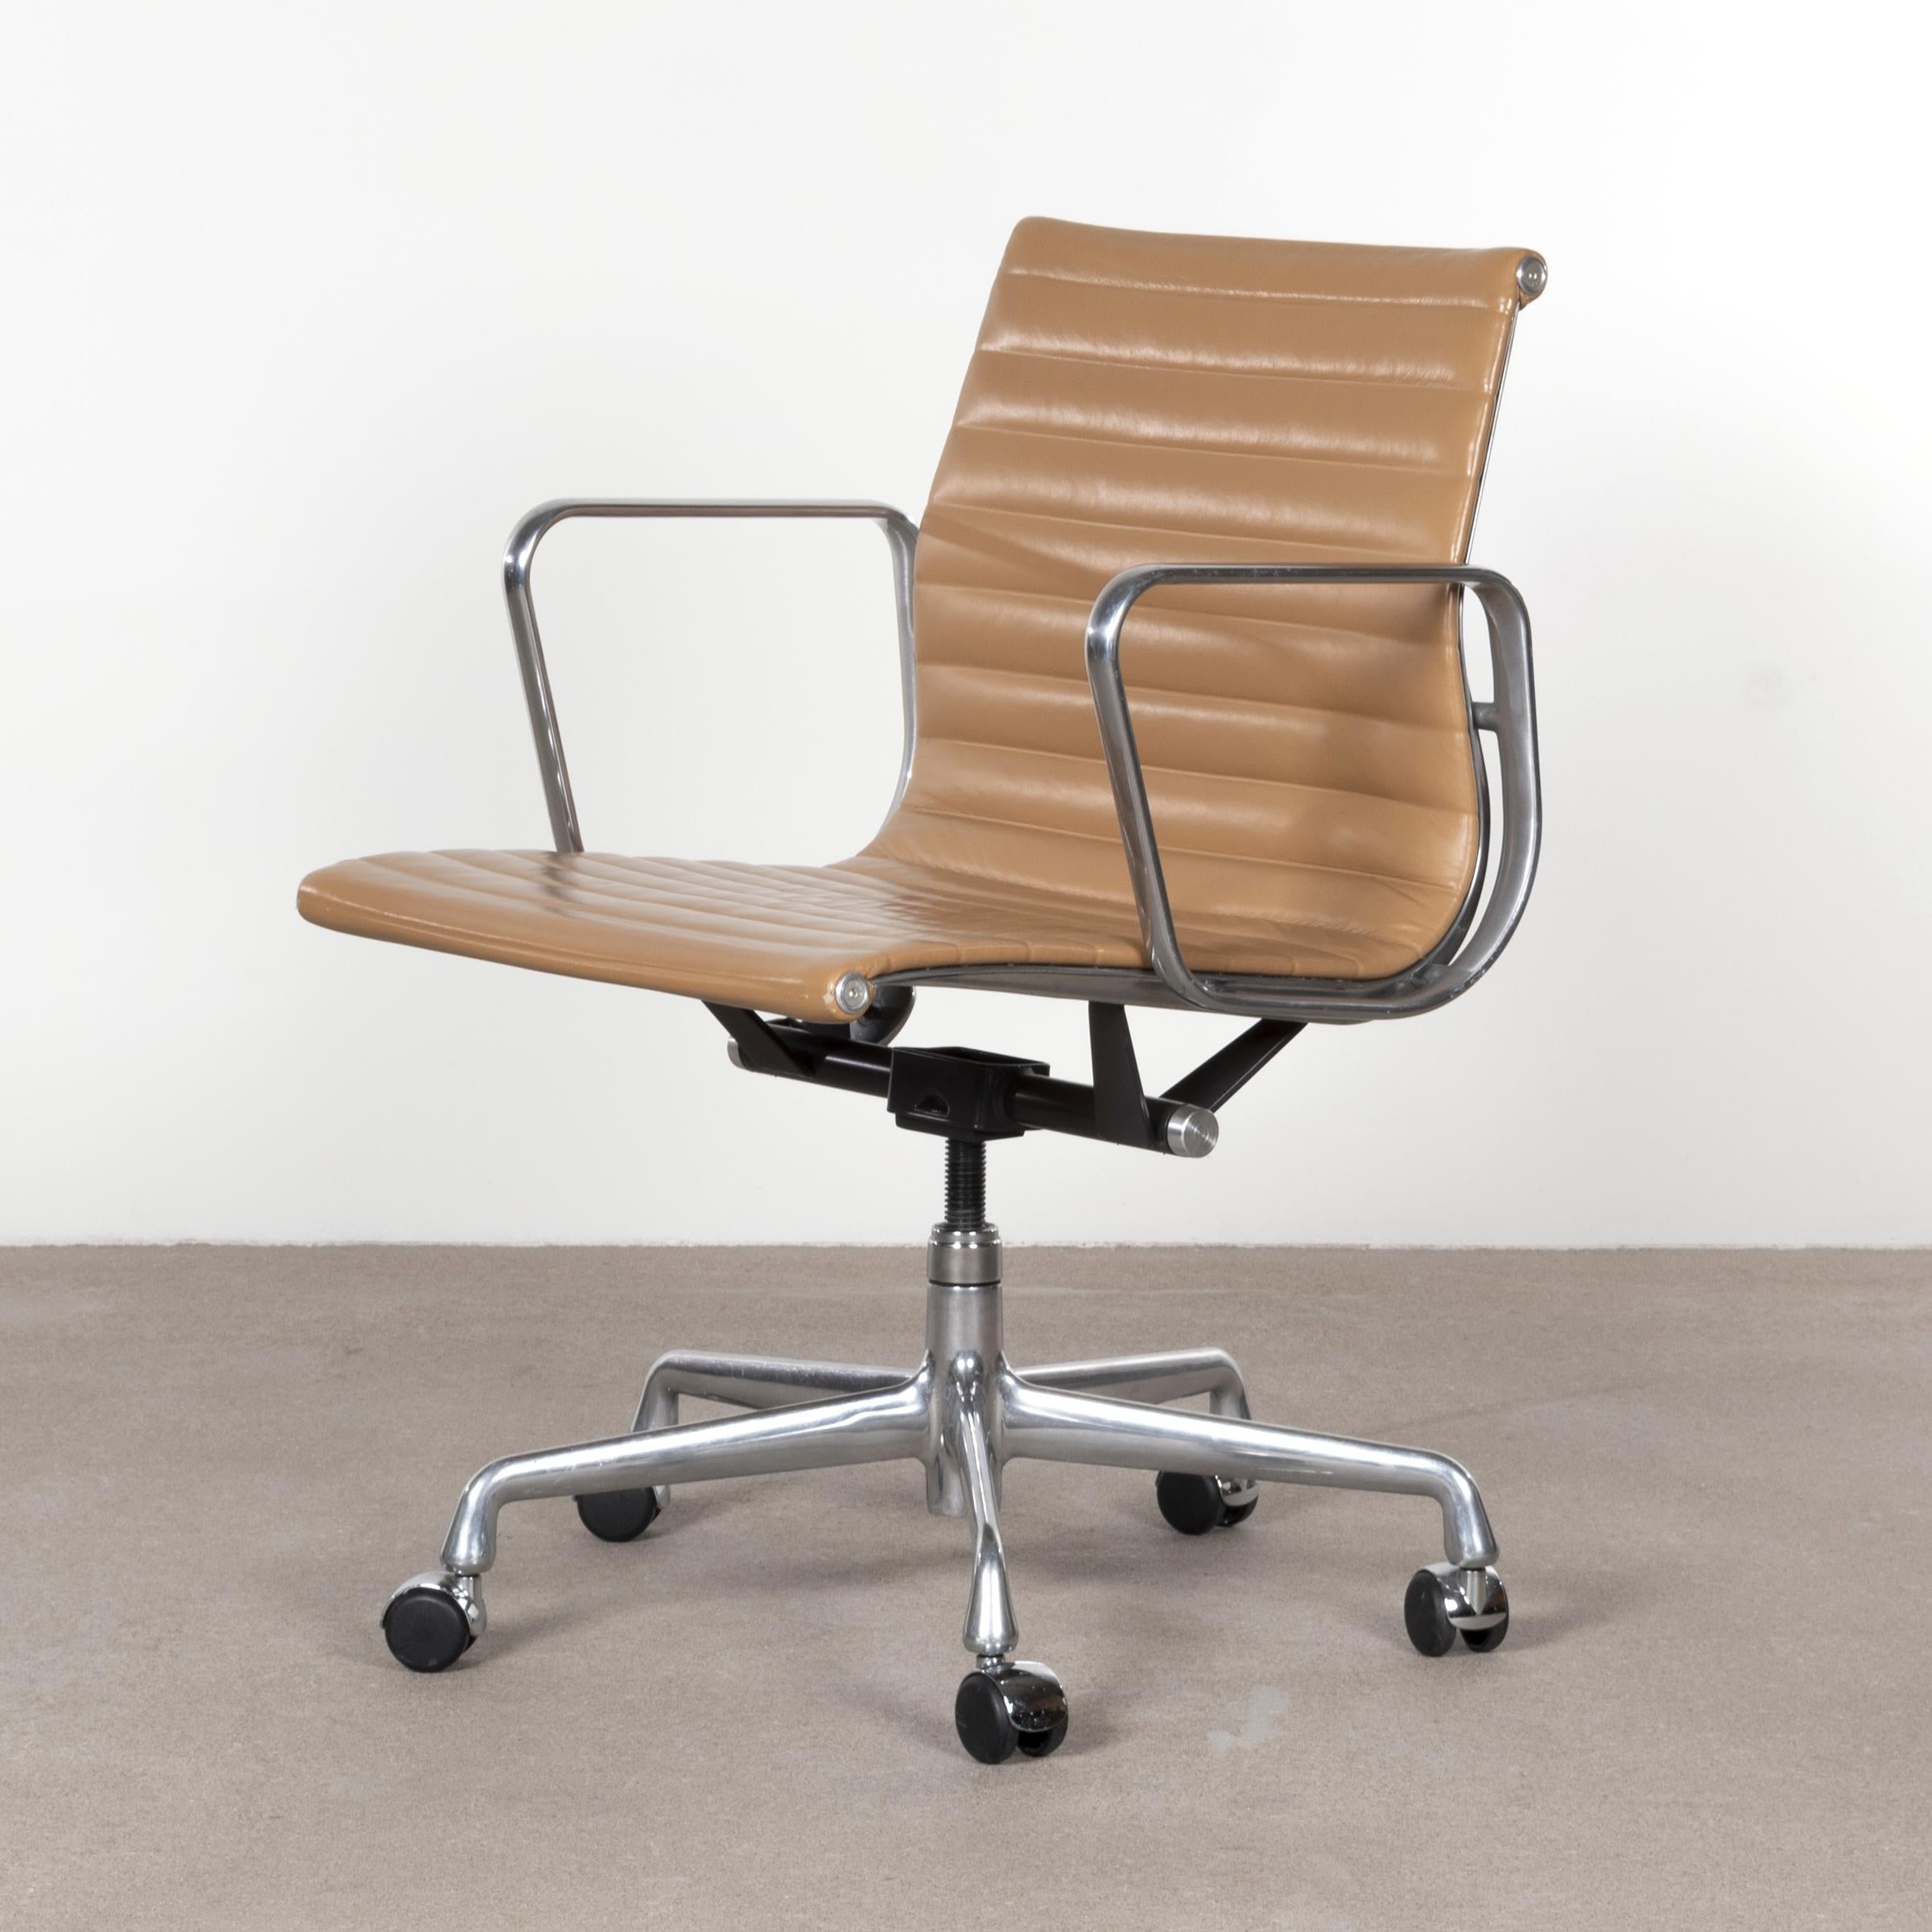 Eames EA335 management office chair in cognac leather with five-star base, spindle and tilt-swivel mechanism. Good original condition signed with manufacturer's label. Multiple chairs available.